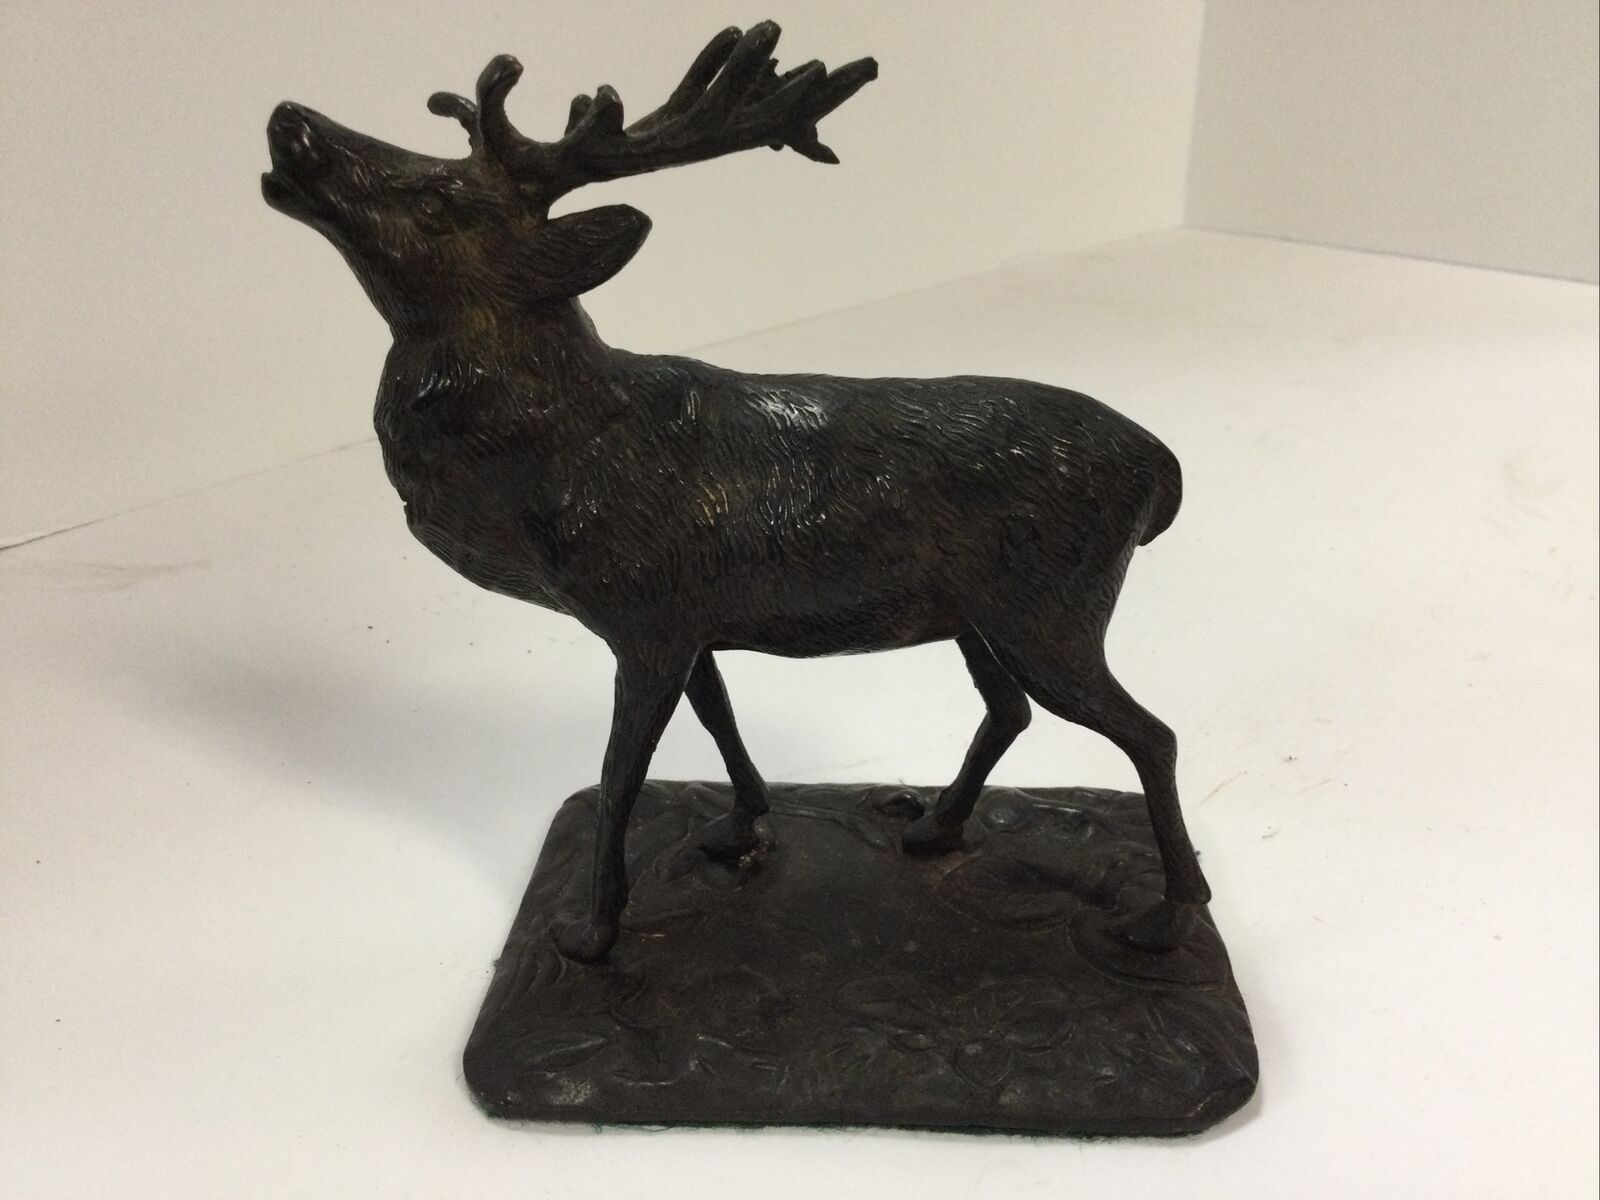 6” BRONZE Metal Art Nouveau, Sculpture of a Black Forest Stag/ 12 Point Antlers